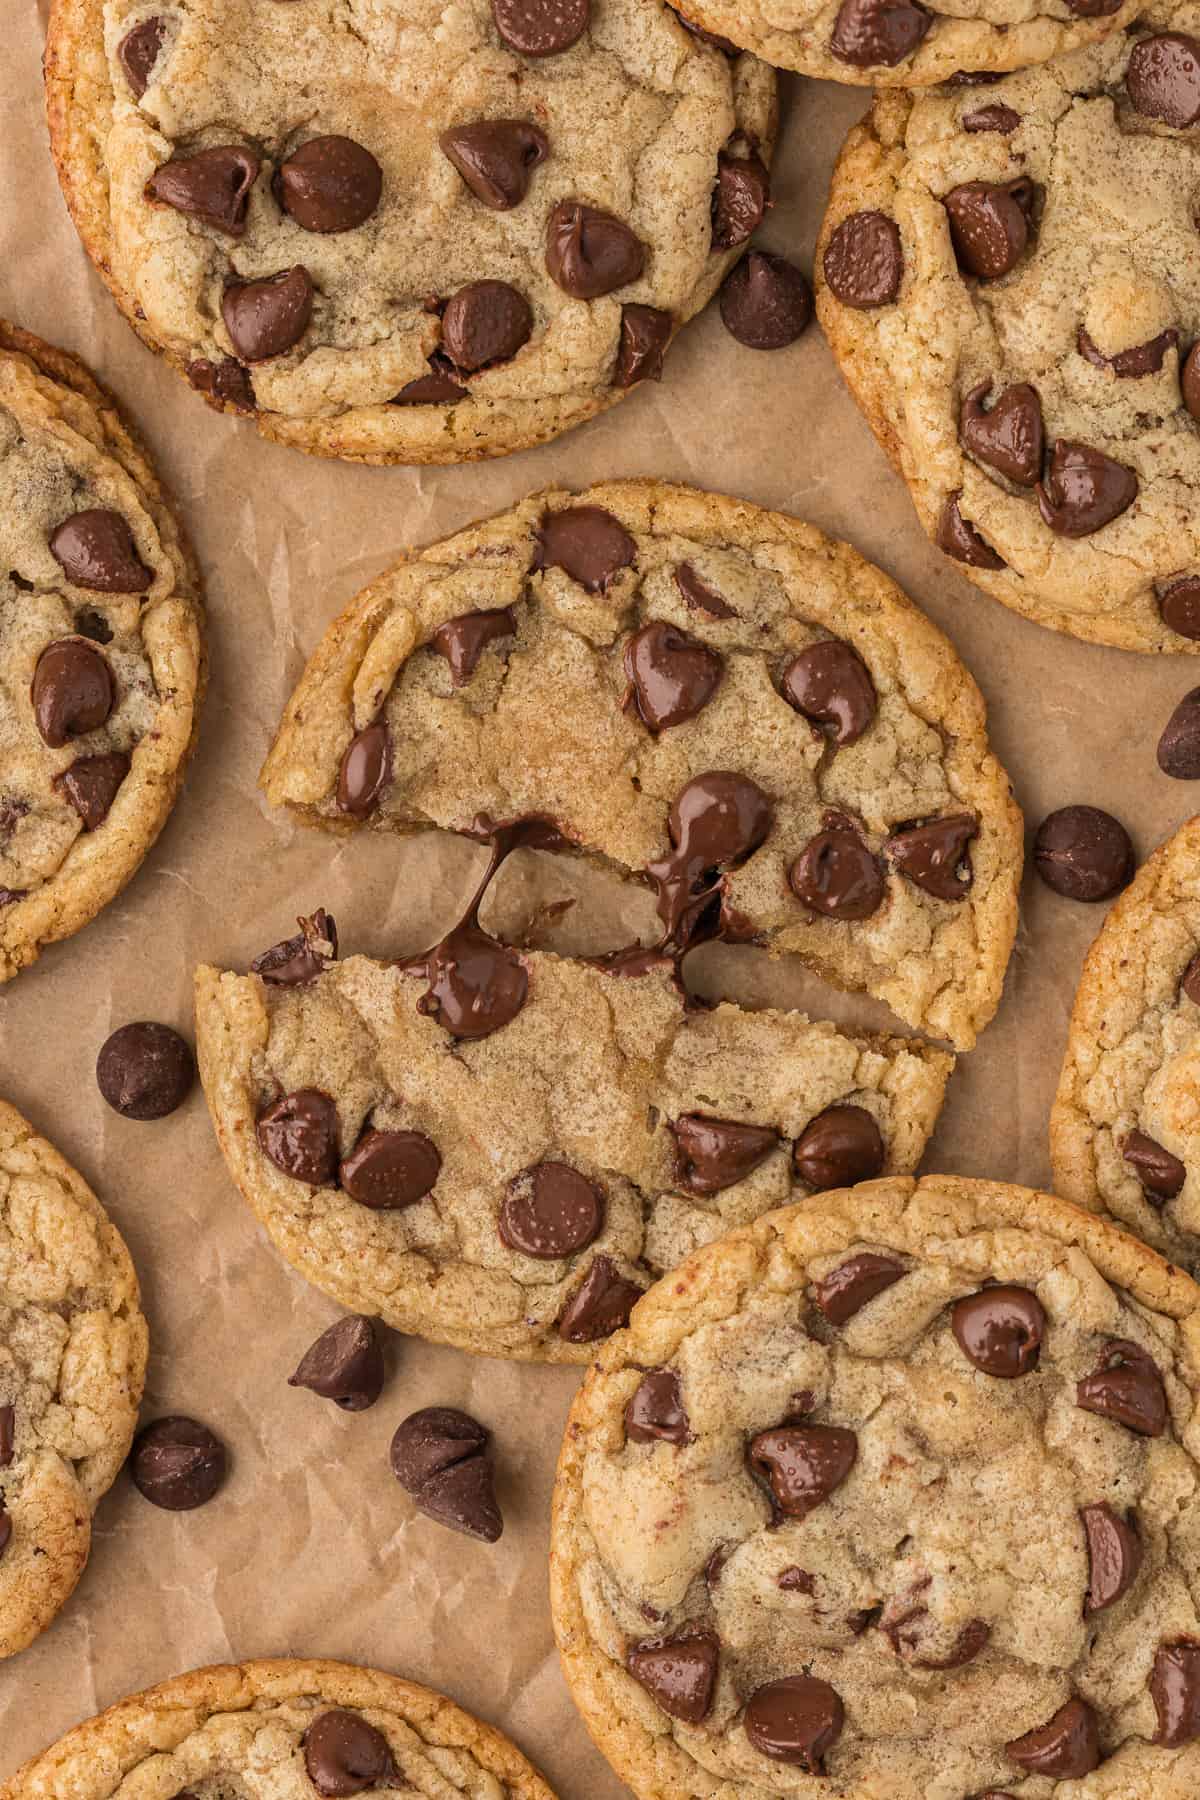 over head view of brown butter chocolate chip cookies on parchment paper with the middle cookie pulled apart at the middle and chocolate chips scattered around